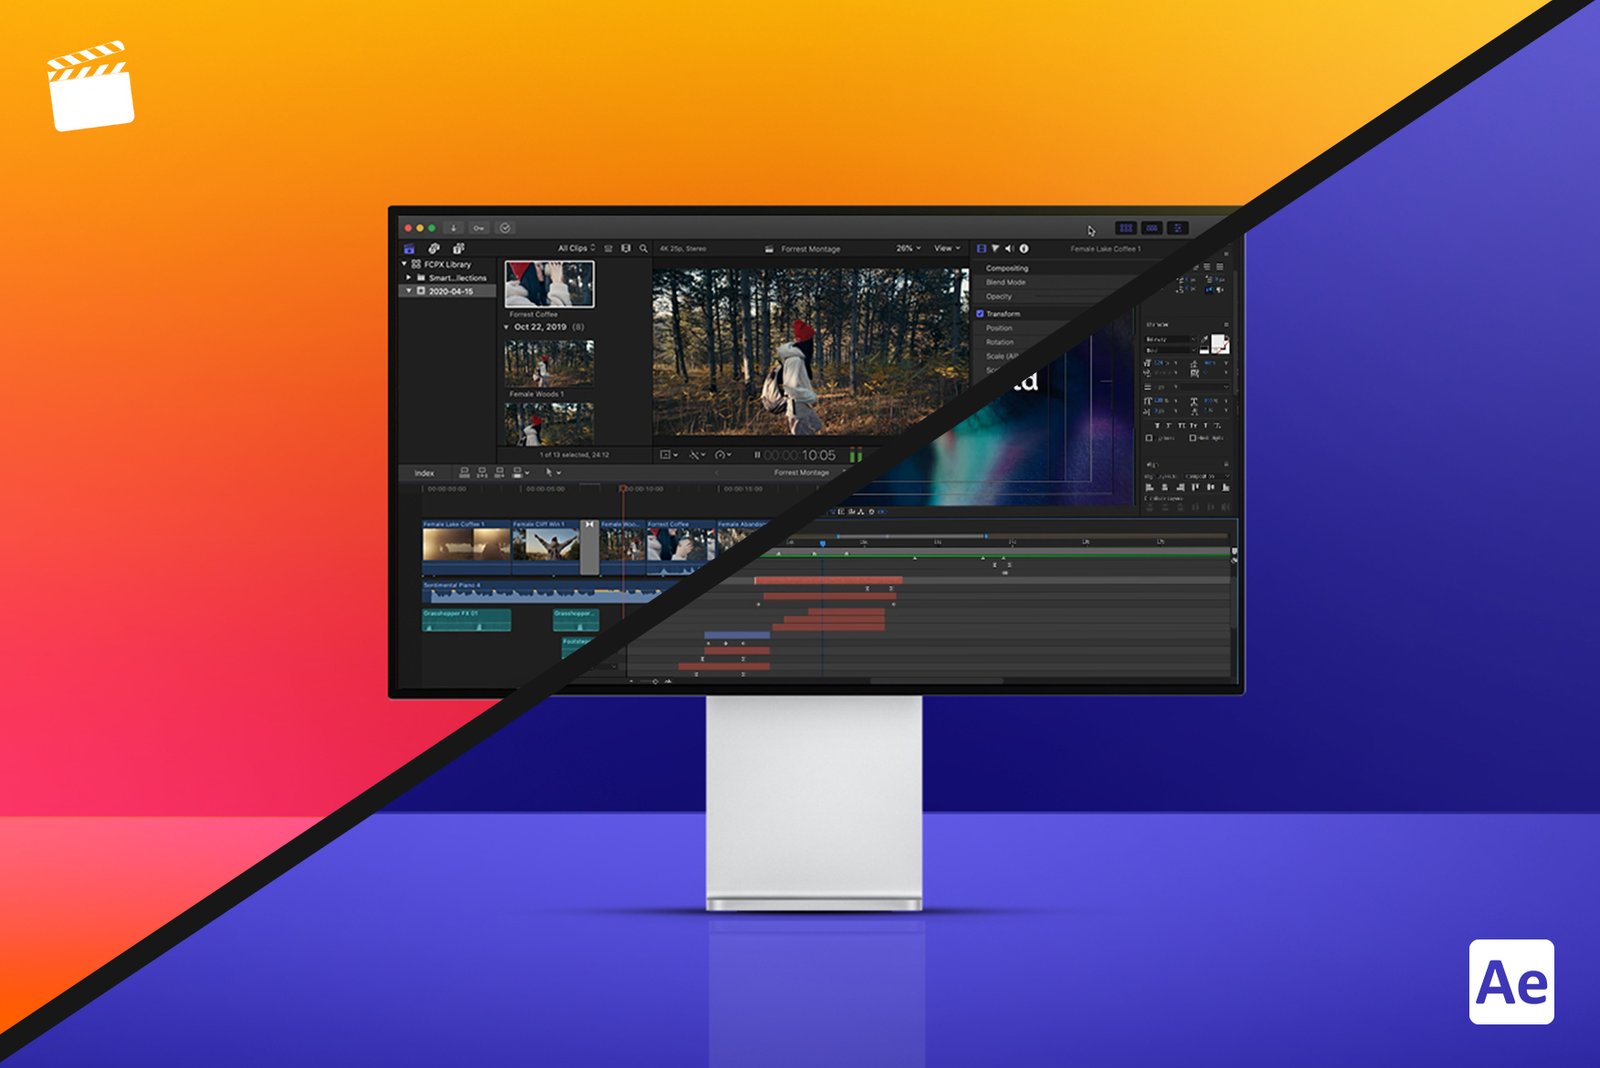 Adobe After Effects or Final Cut Pro, which editing software is better